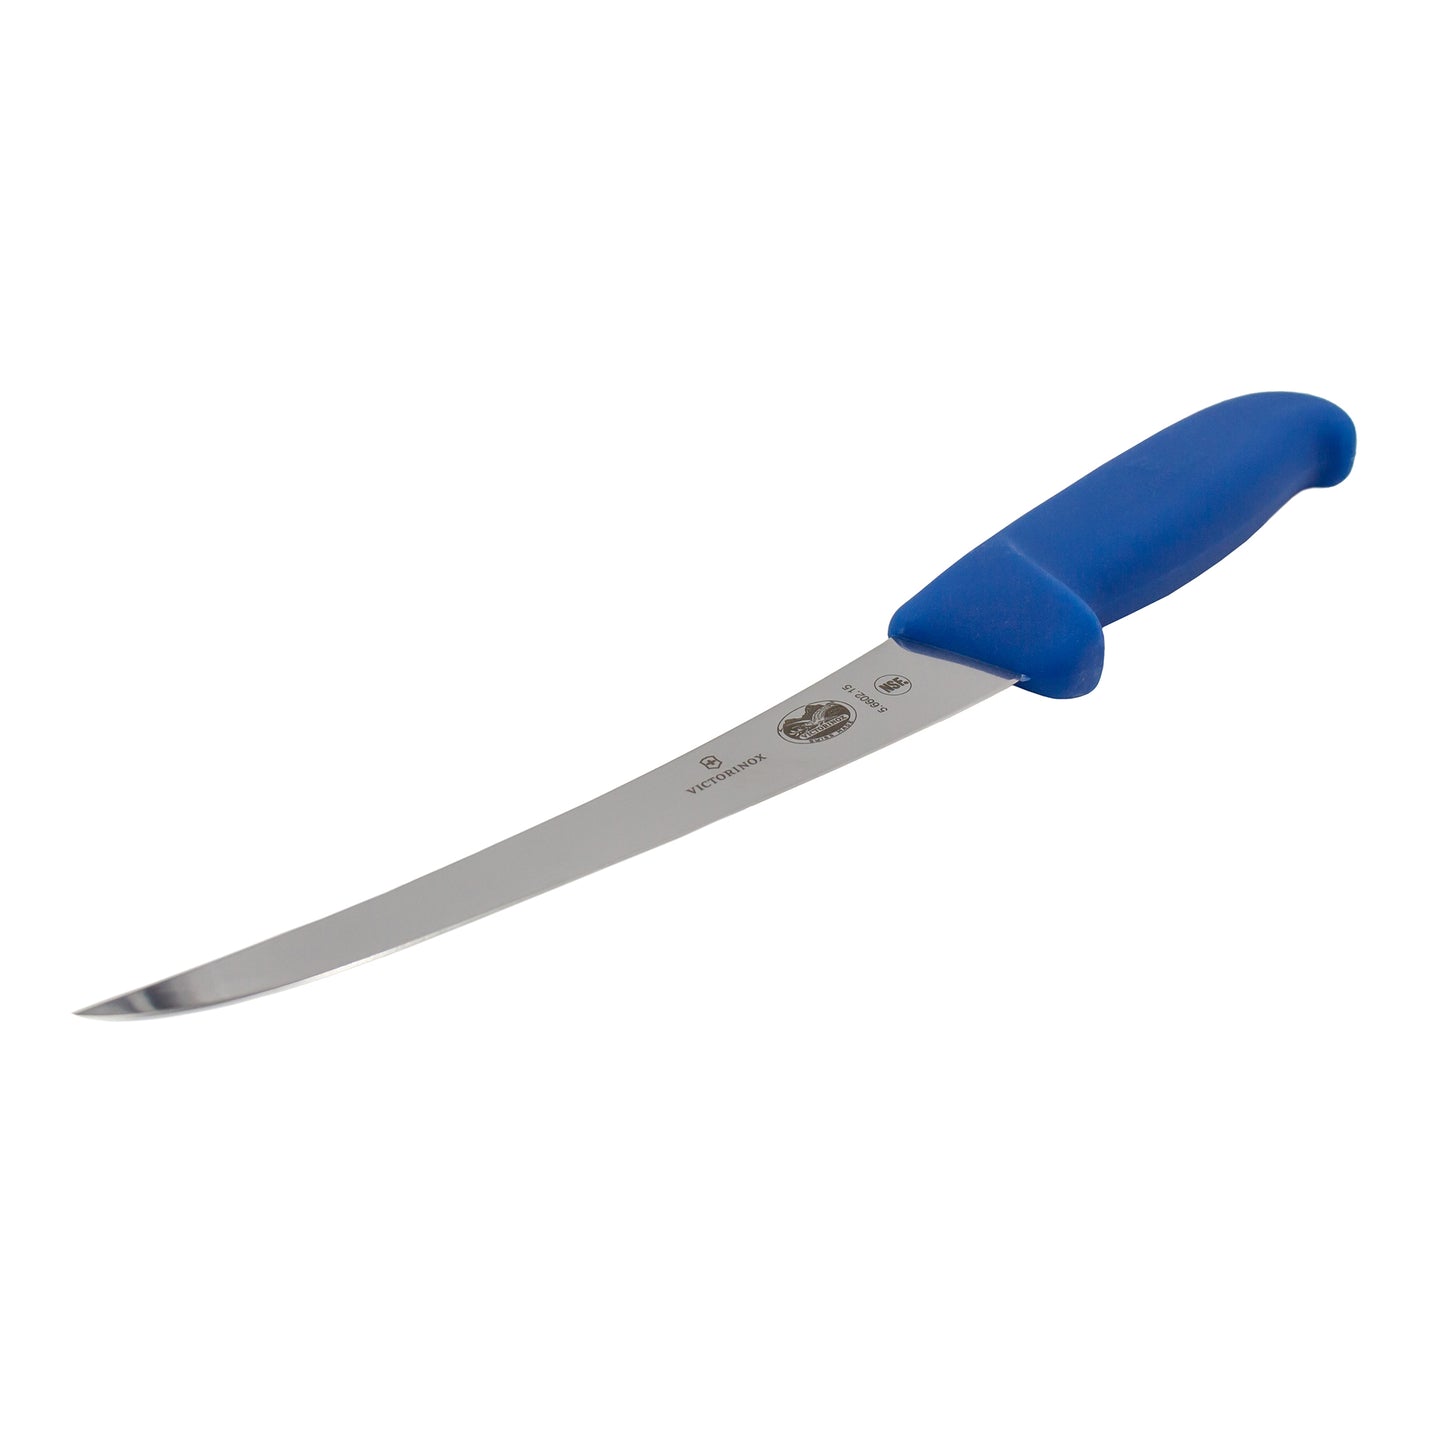 Stainless Steel Victorinox boning knife with blue handle